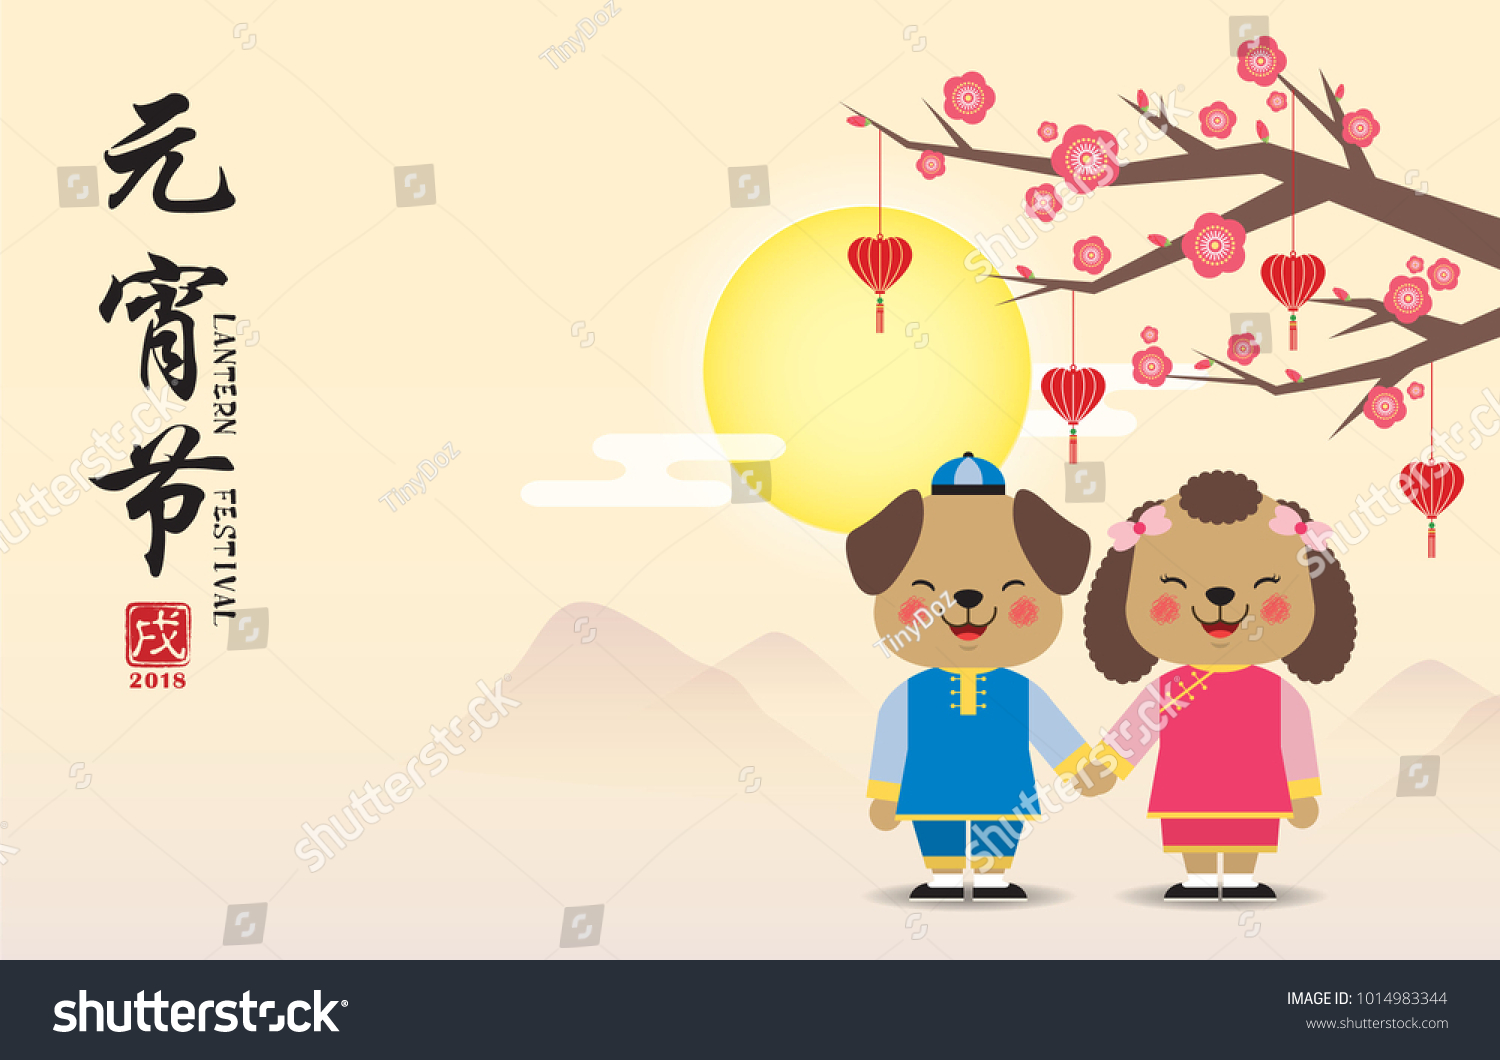 Lantern festival or Chinese valentine's day (Yuan Xiao Jie). Cute cartoon dogs holding hands with heart shape lanterns, plum blossom tree & landscape. (caption: Lantern festival, year of the dog) #1014983344